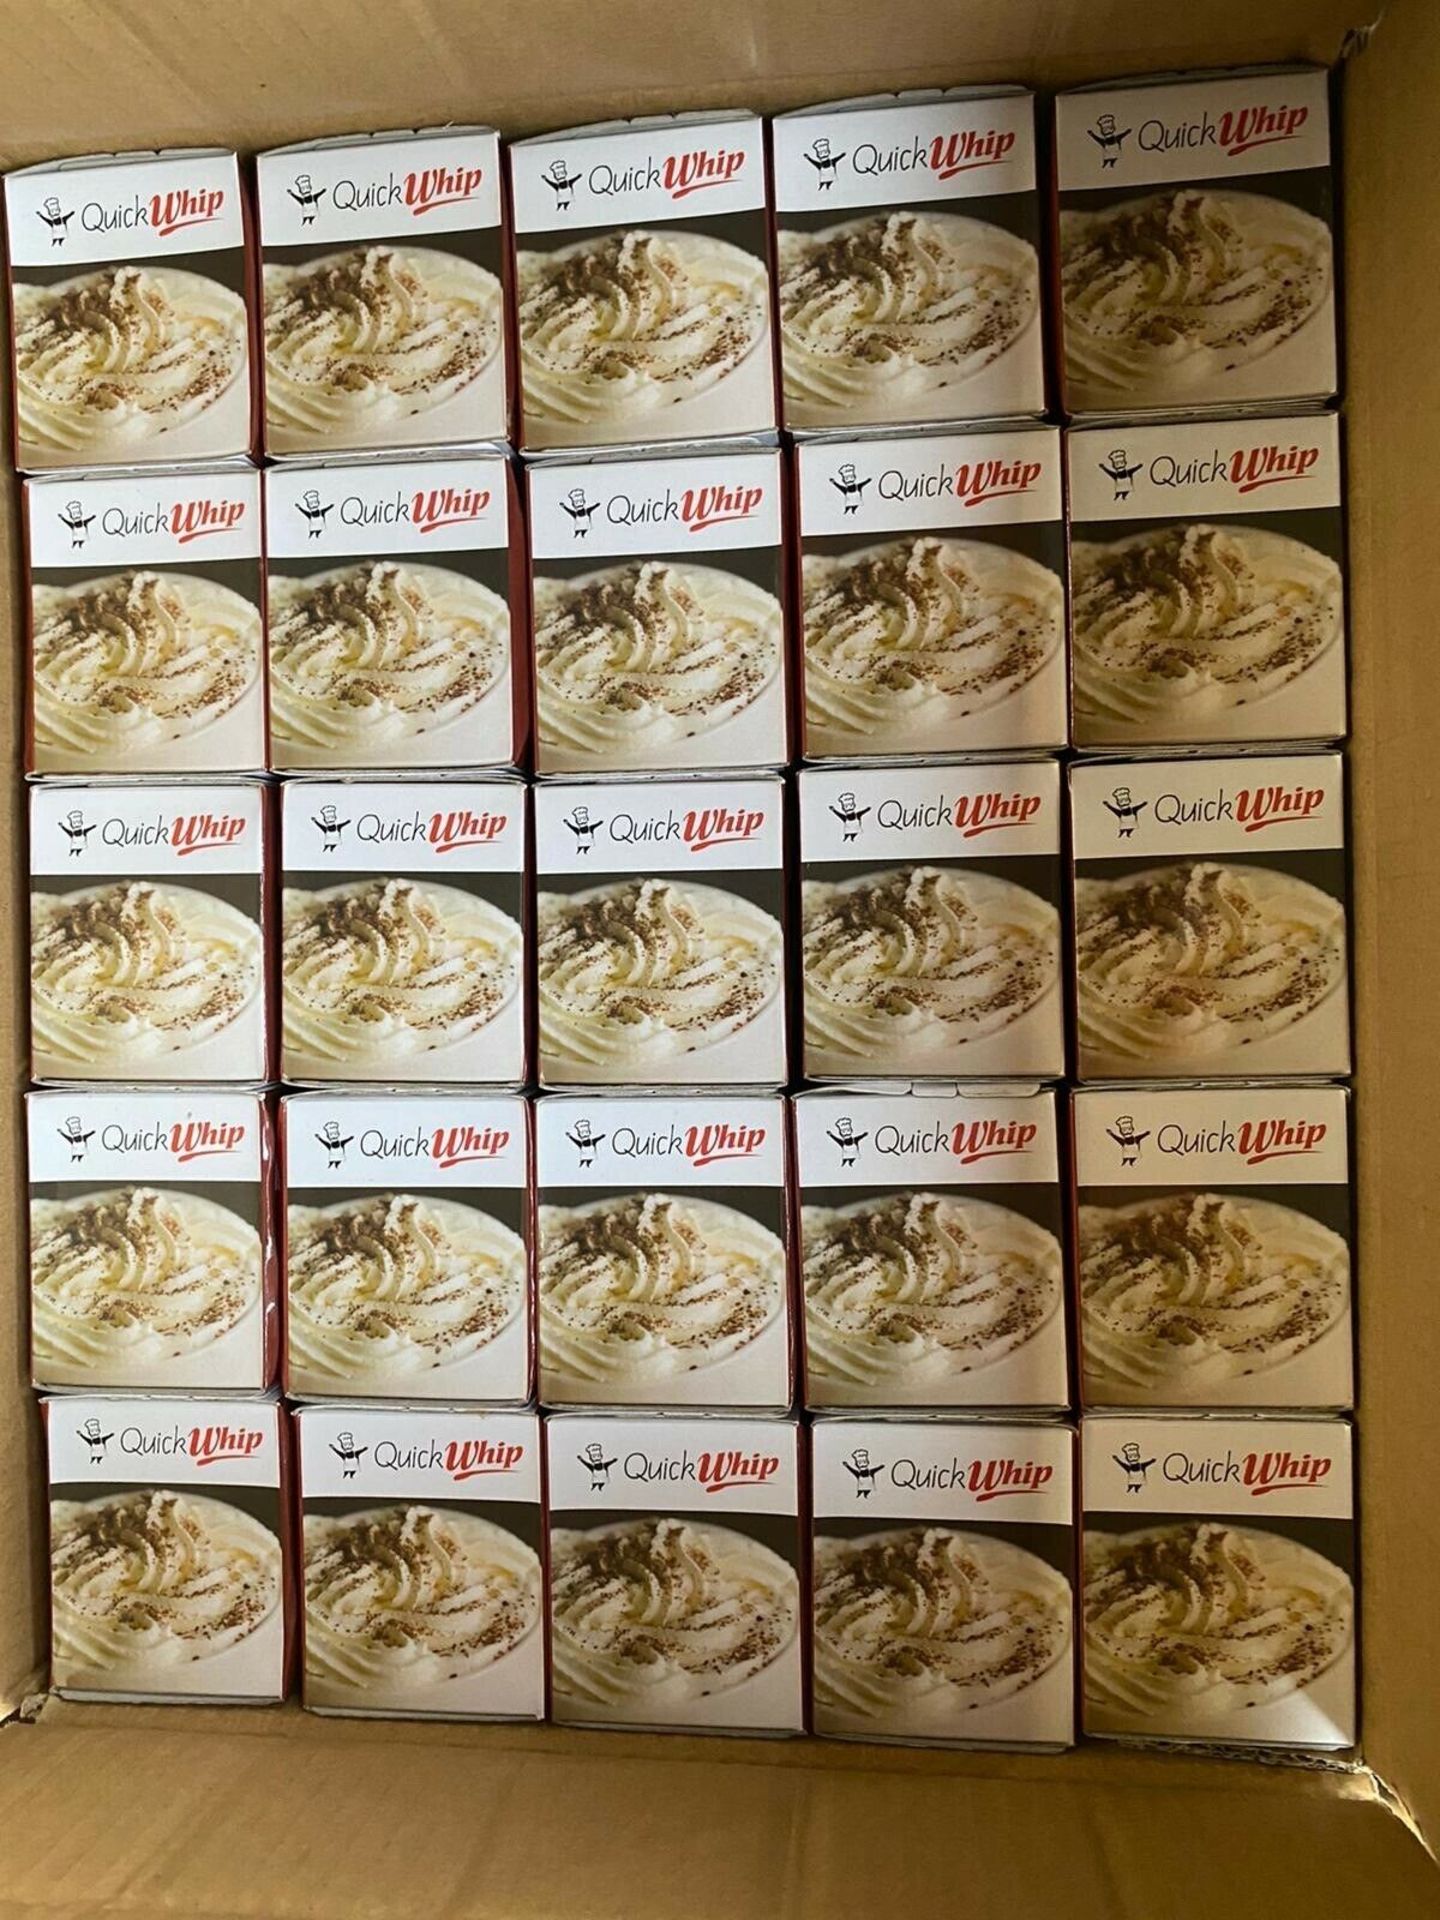 1 x Case of 600 x 8g Whipping Cream Chargers branded 'QuickWhip'